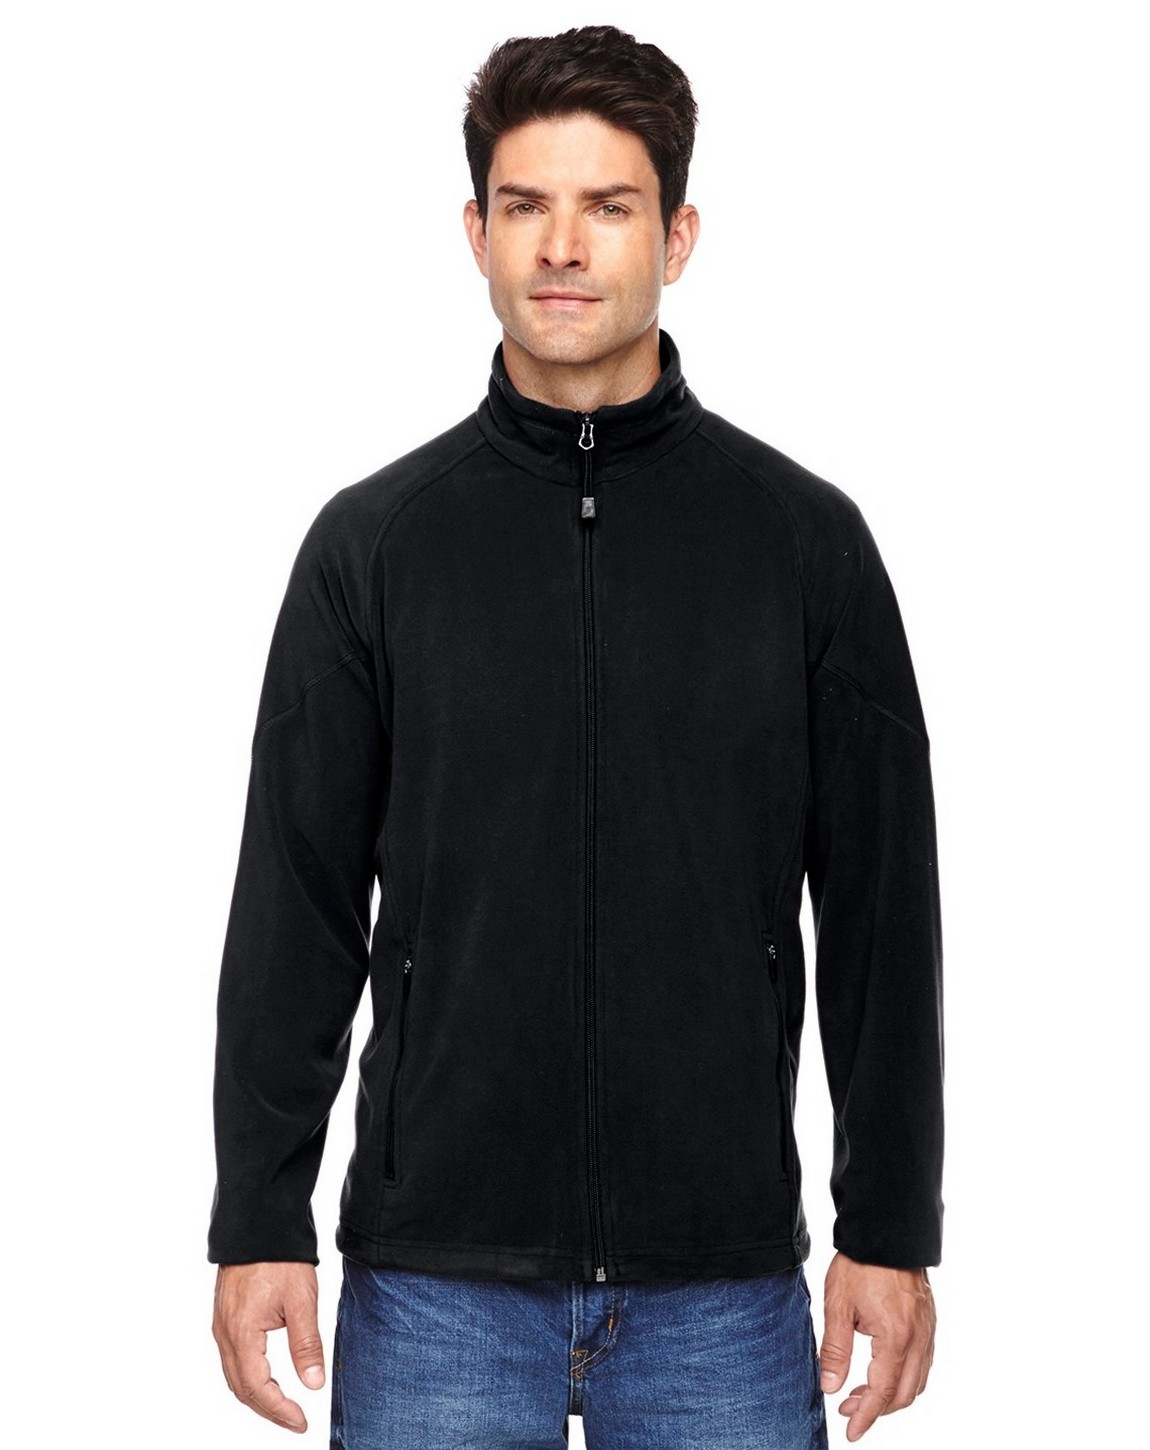 North End 88095 Mens Microfleece Unlined Jacket